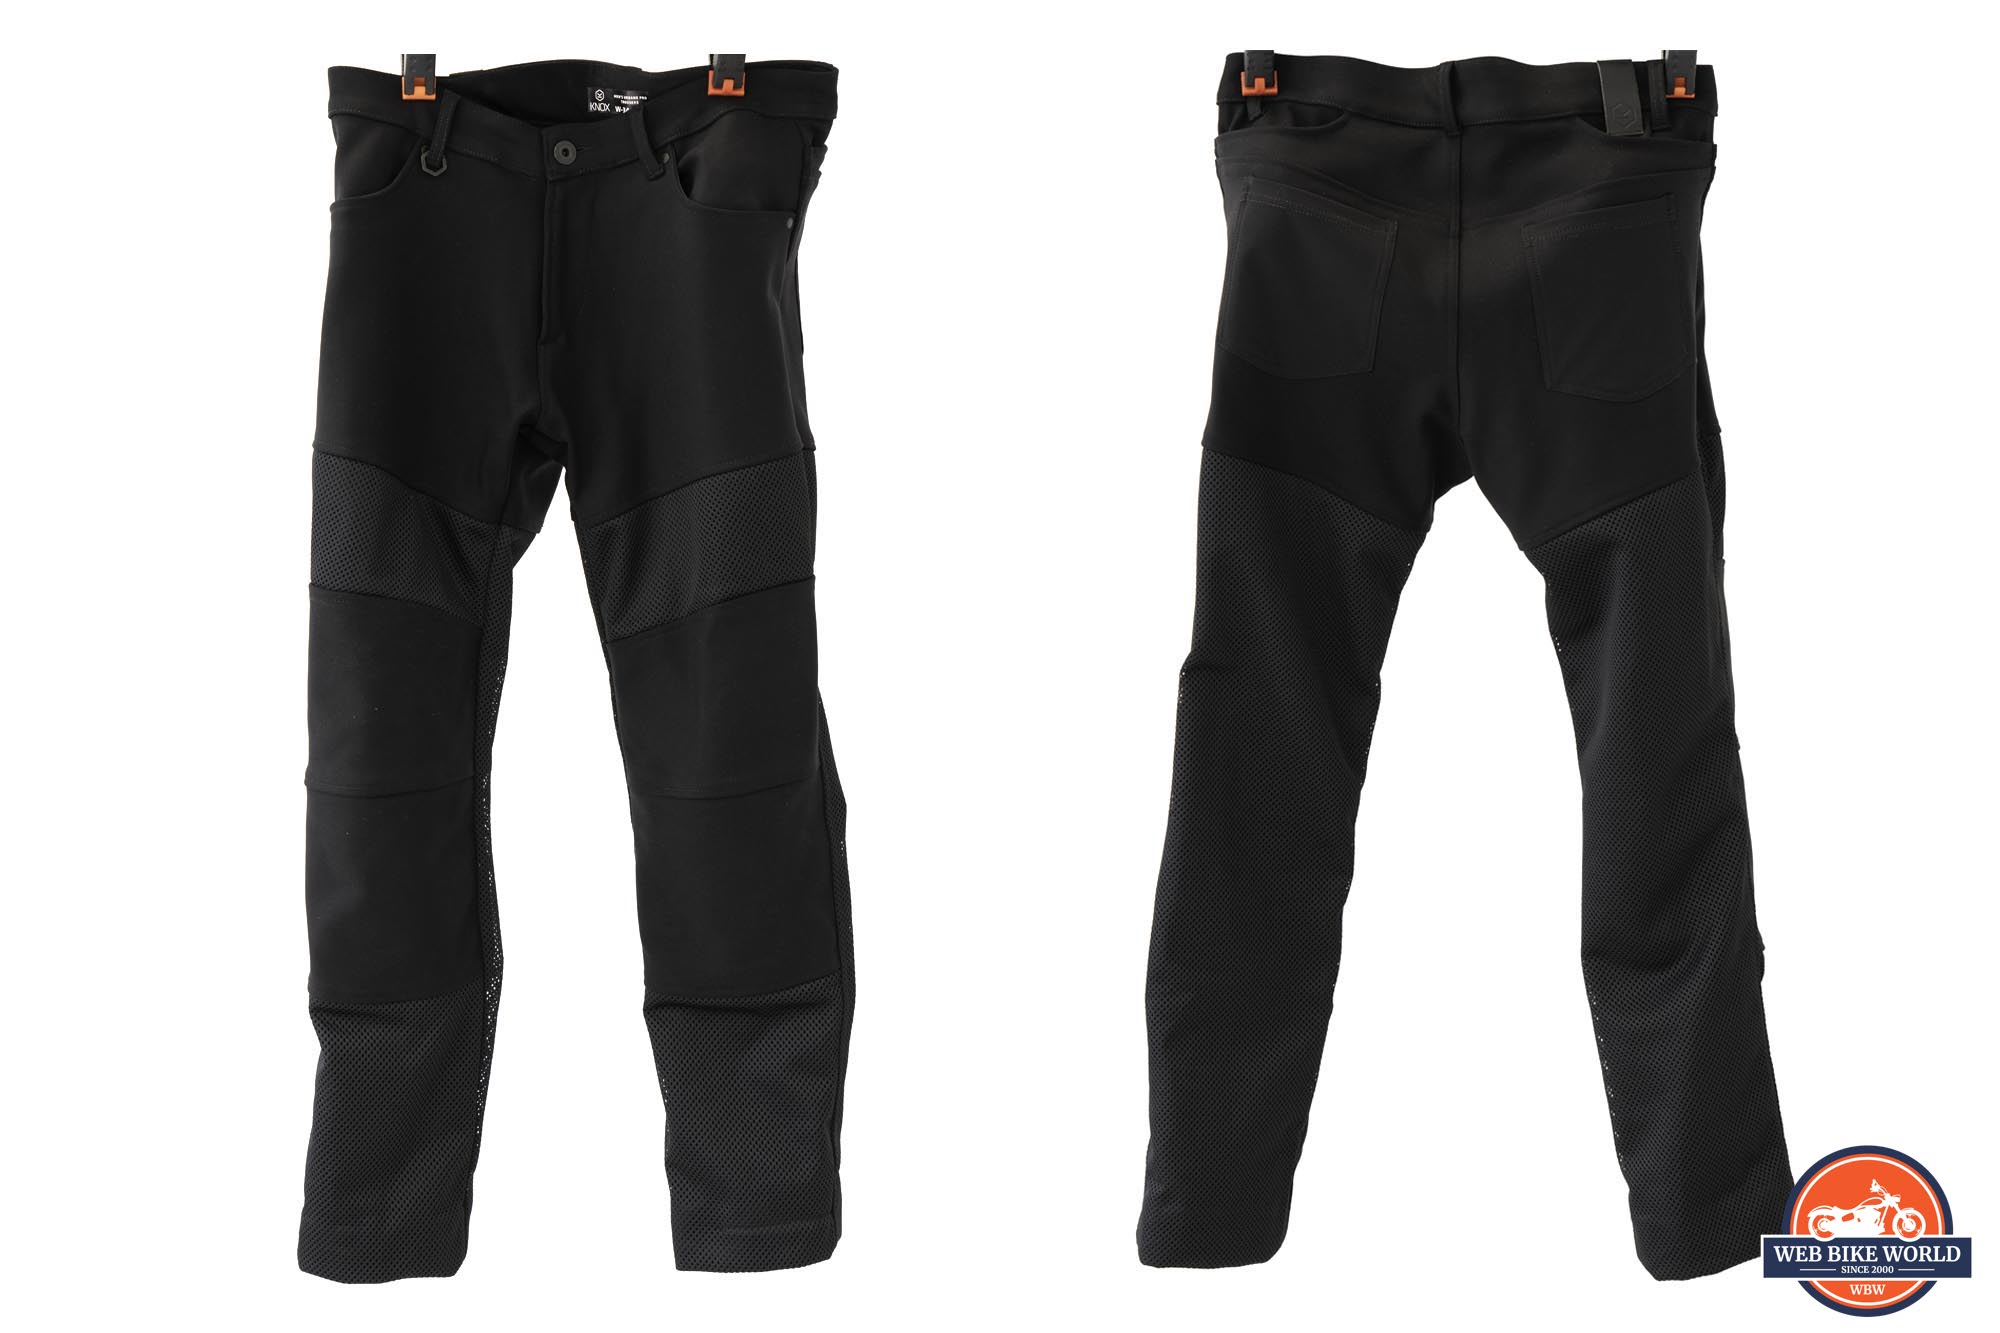 A front and back view of the Knox Urbane Pro Trousers